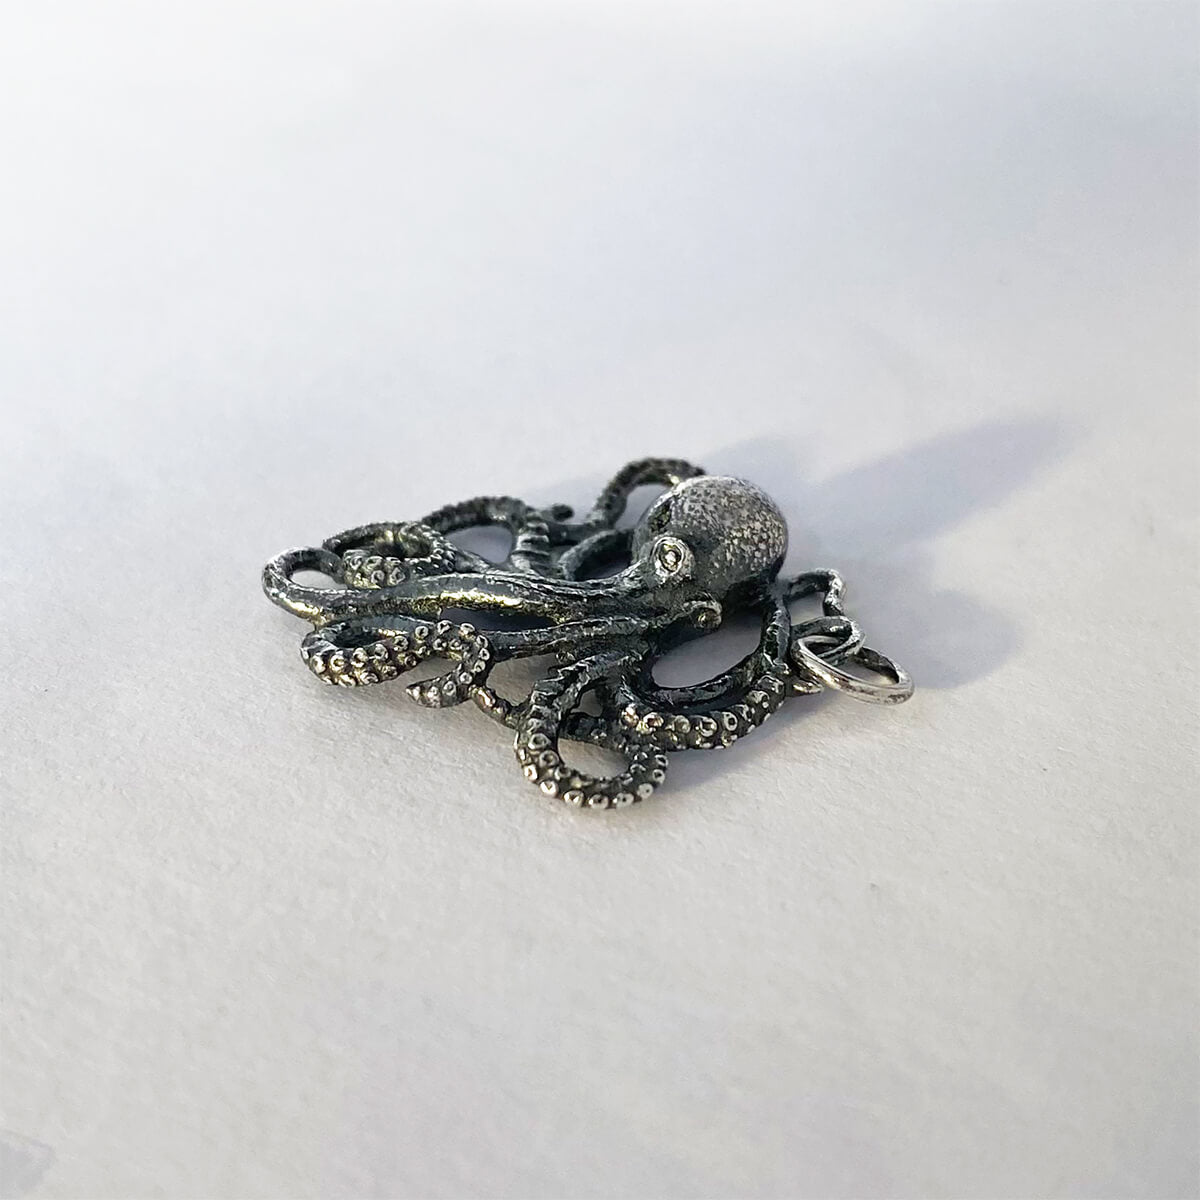 Octopus pendant sterling silver cephalopod